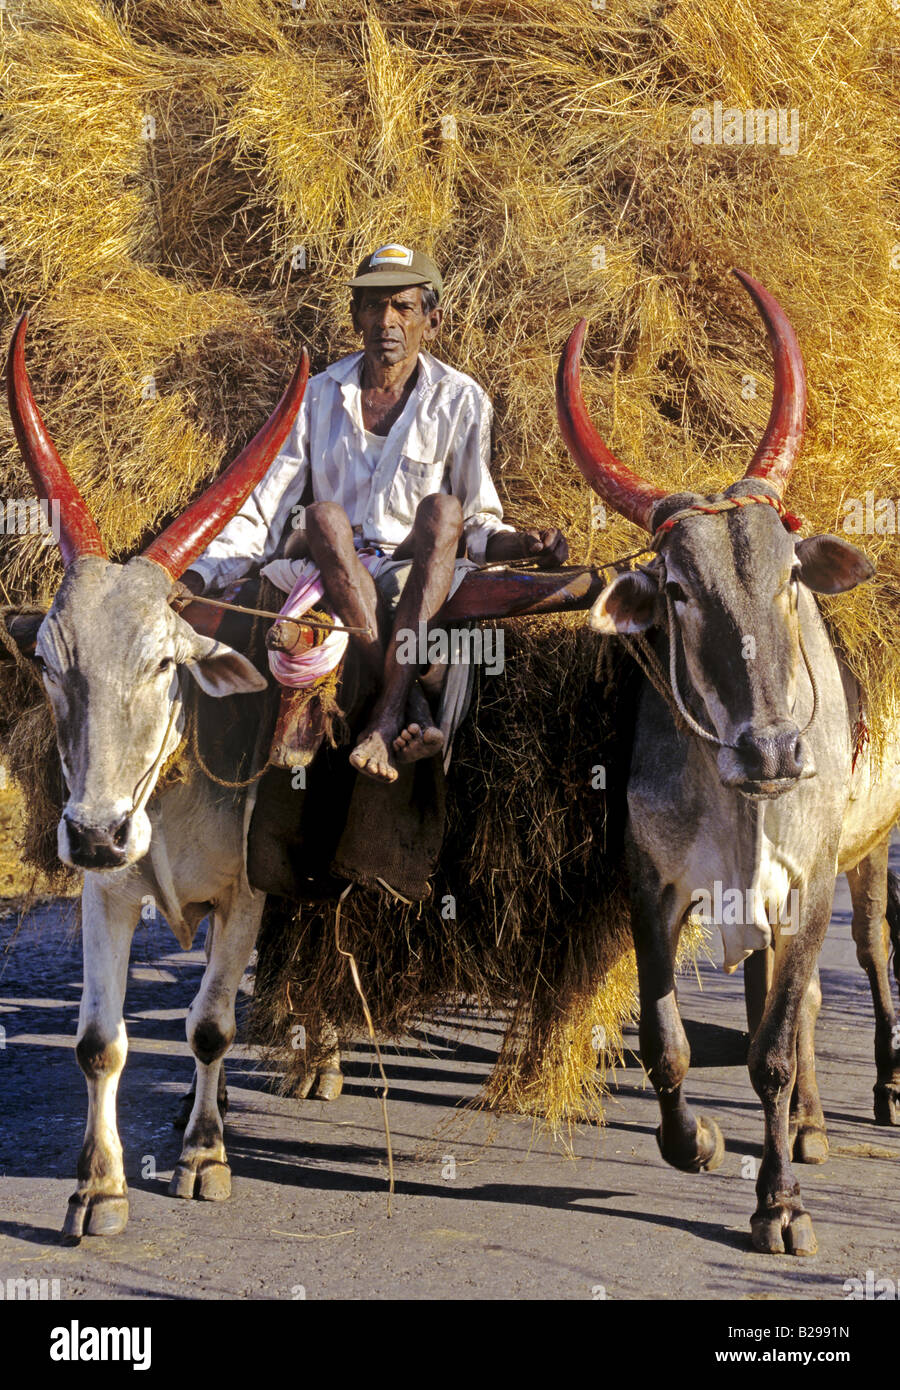 Cow cart Goa State India Date 15 06 2008 Ref ZB548 115573 0071 COMPULSORY CREDIT World Pictures Photoshot Stock Photo